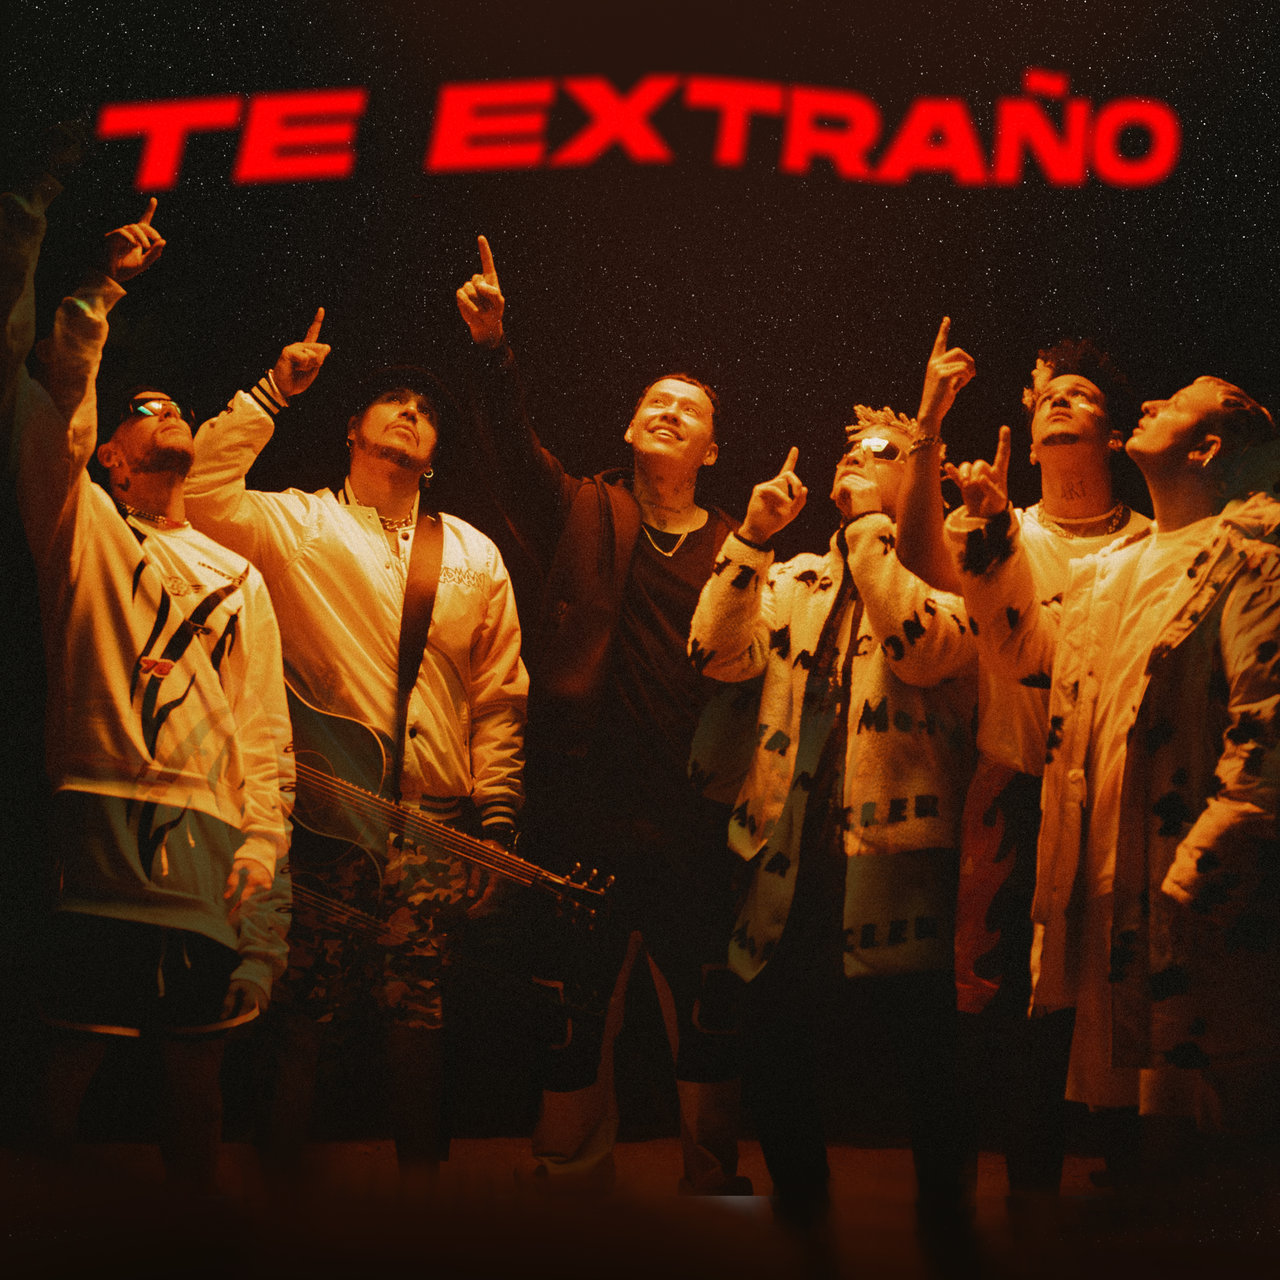 Ovy On The Drums - Te Extraño (ft. Piso 21 and Blessd) (Cover)